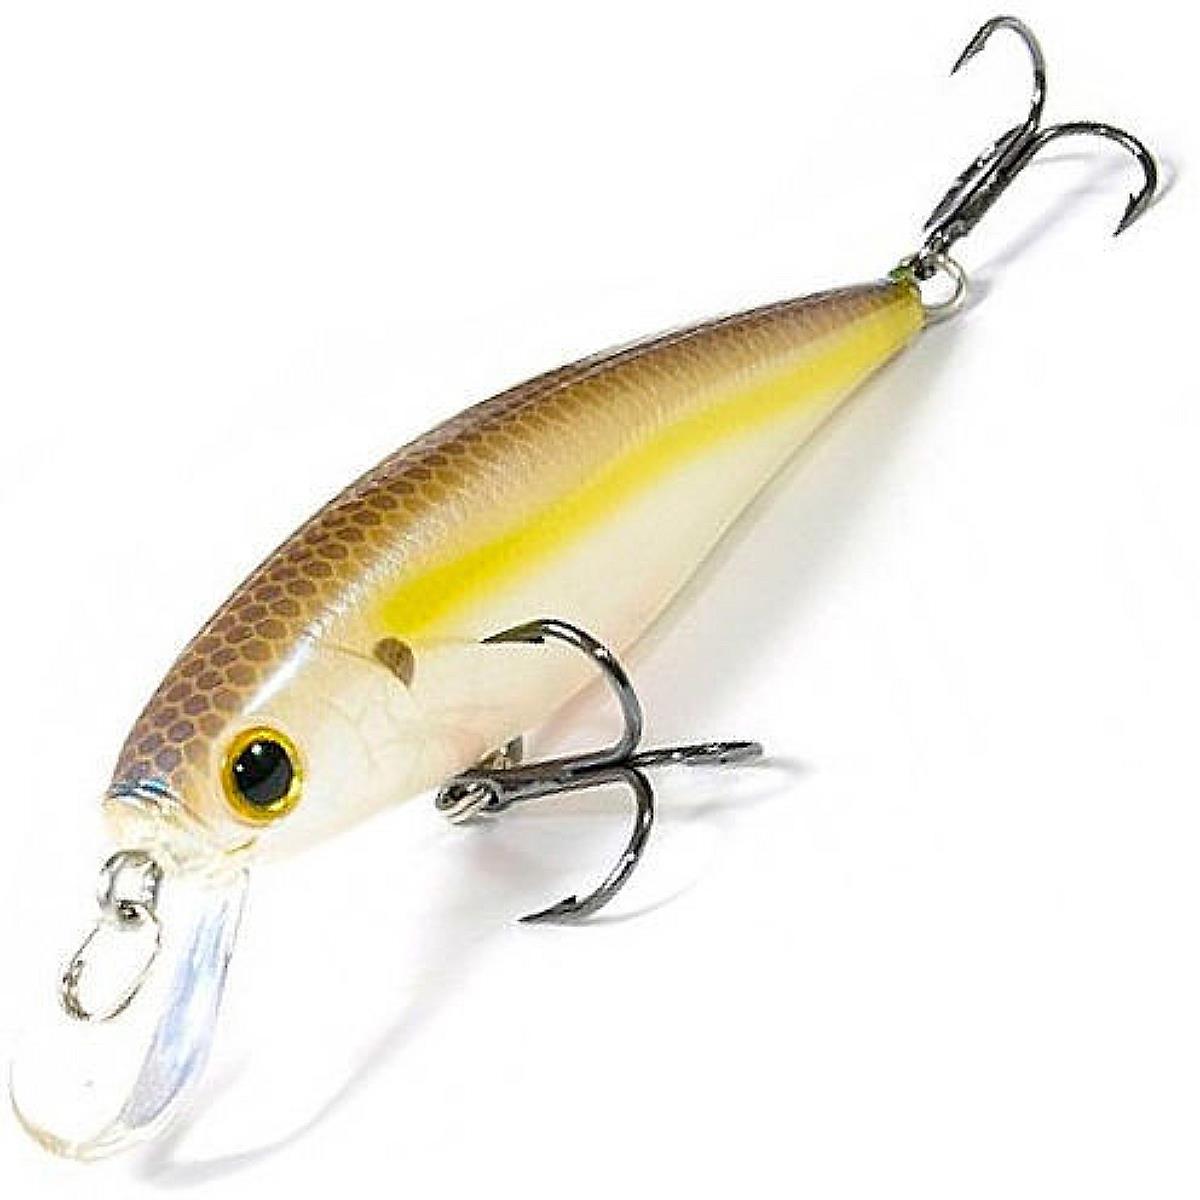 воблер pointer 78dd 250 chartreuse shad lucky craft Воблер Pointer 78-250 Chartreuse Shad Lucky Craft